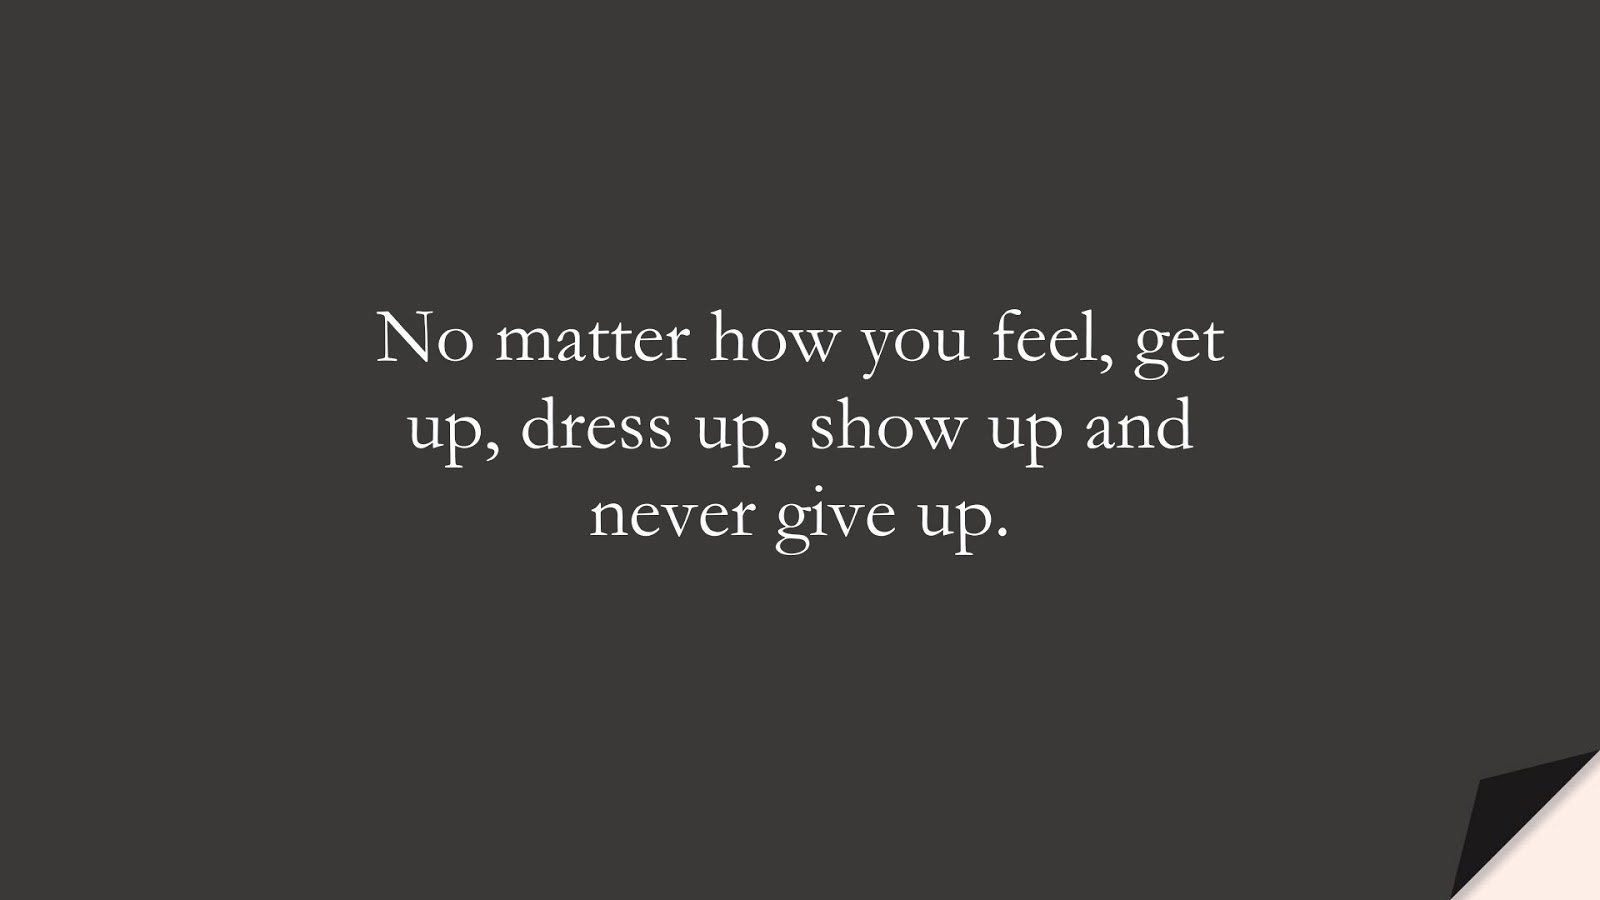 No matter how you feel, get up, dress up, show up and never give up.FALSE